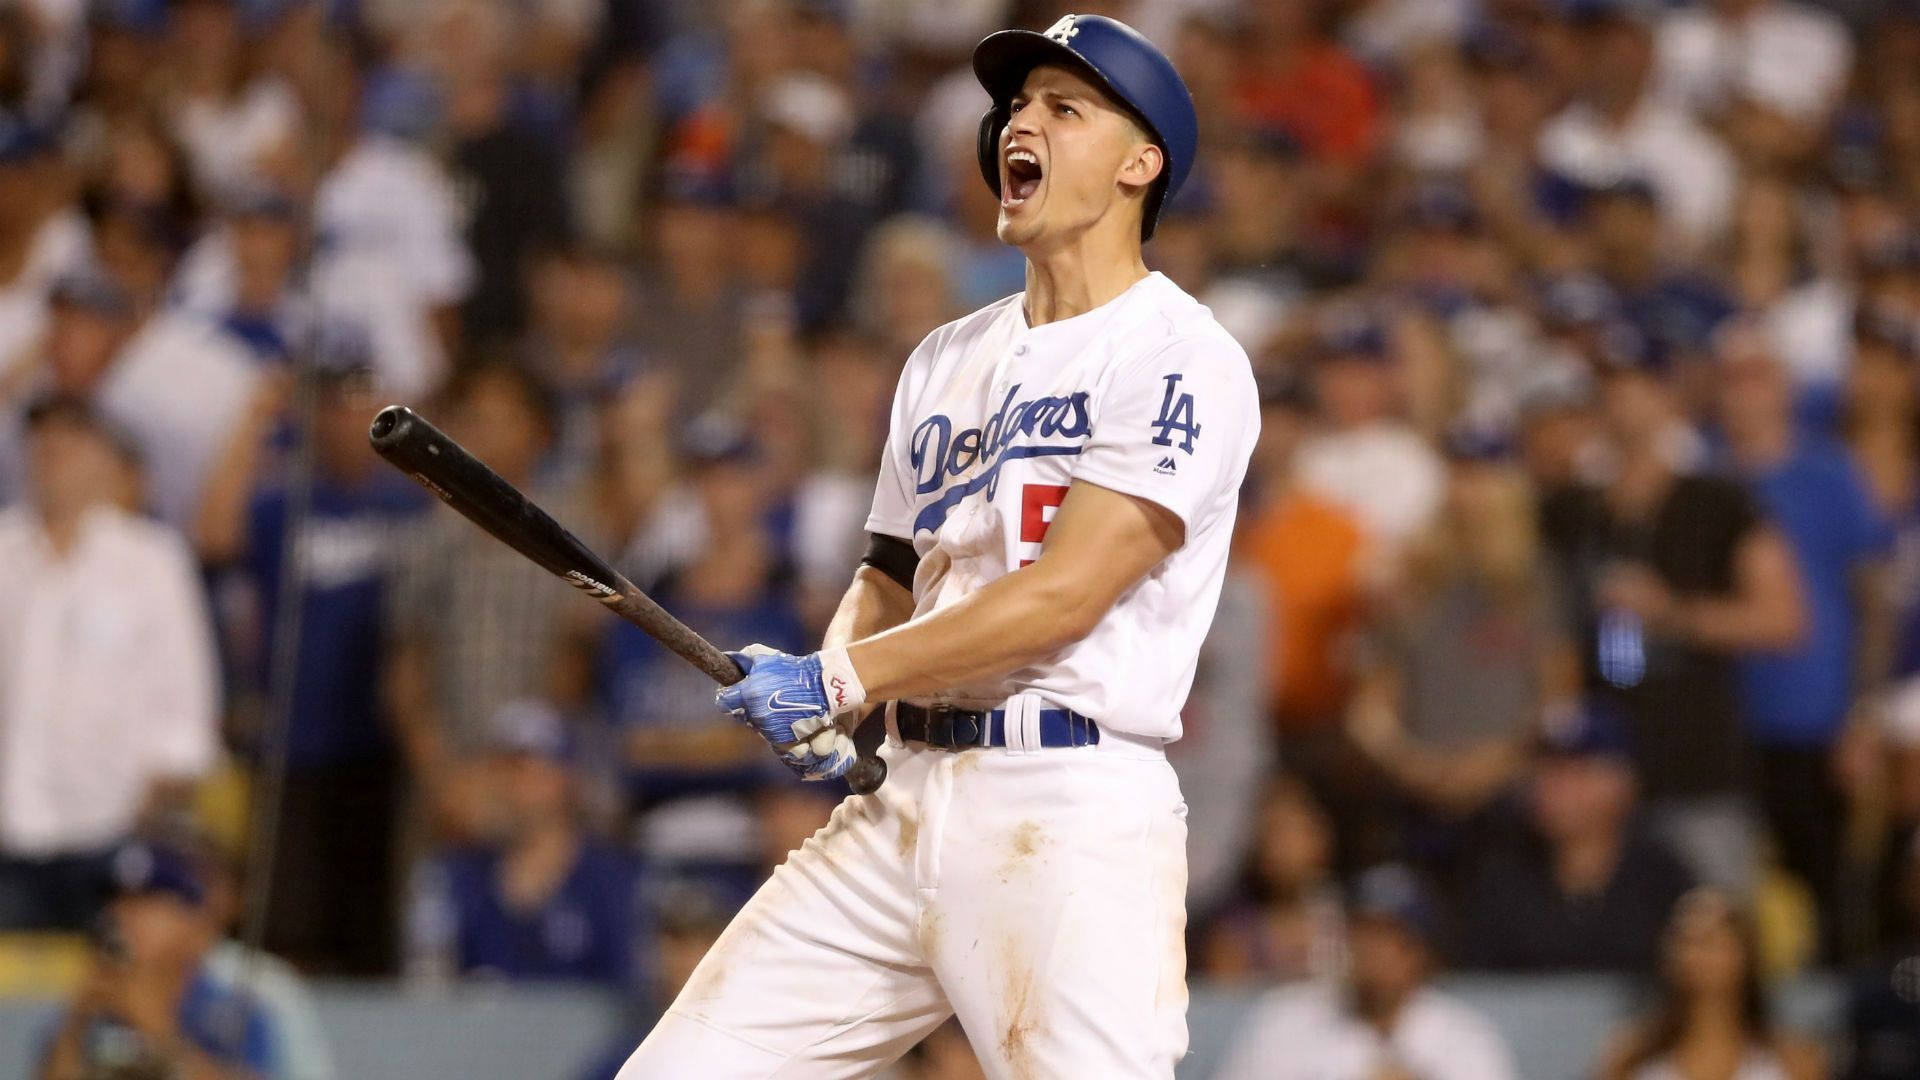 Download Corey Seager Cheering While Holding A Bat Wallpaper